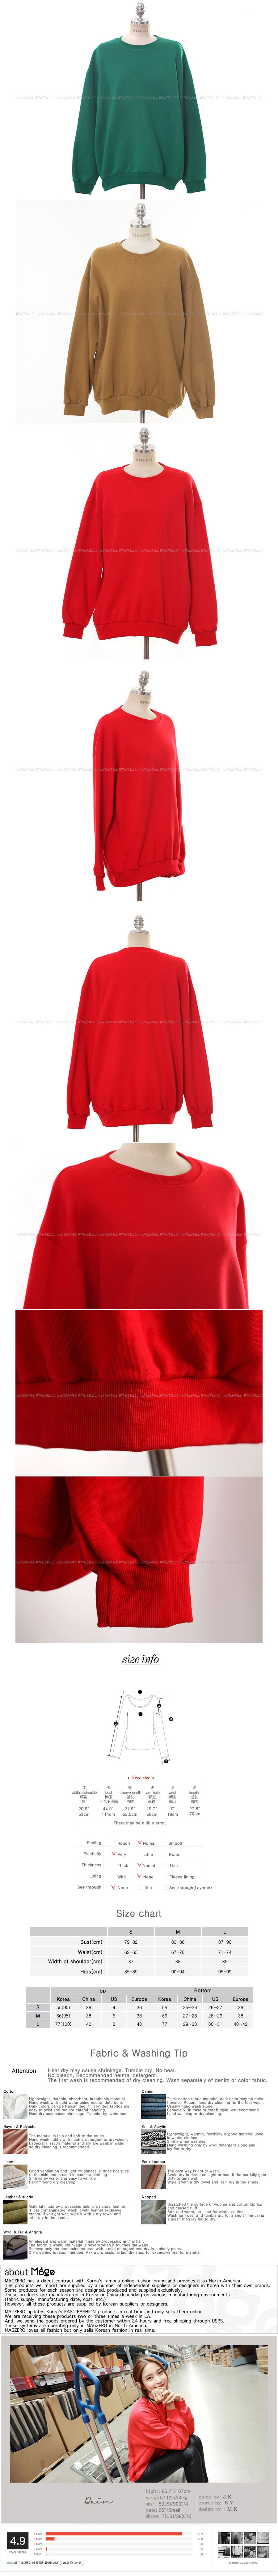 KOREA Oversized Pullover Sweatshirt Red One Size(Free) [Free Shipping]